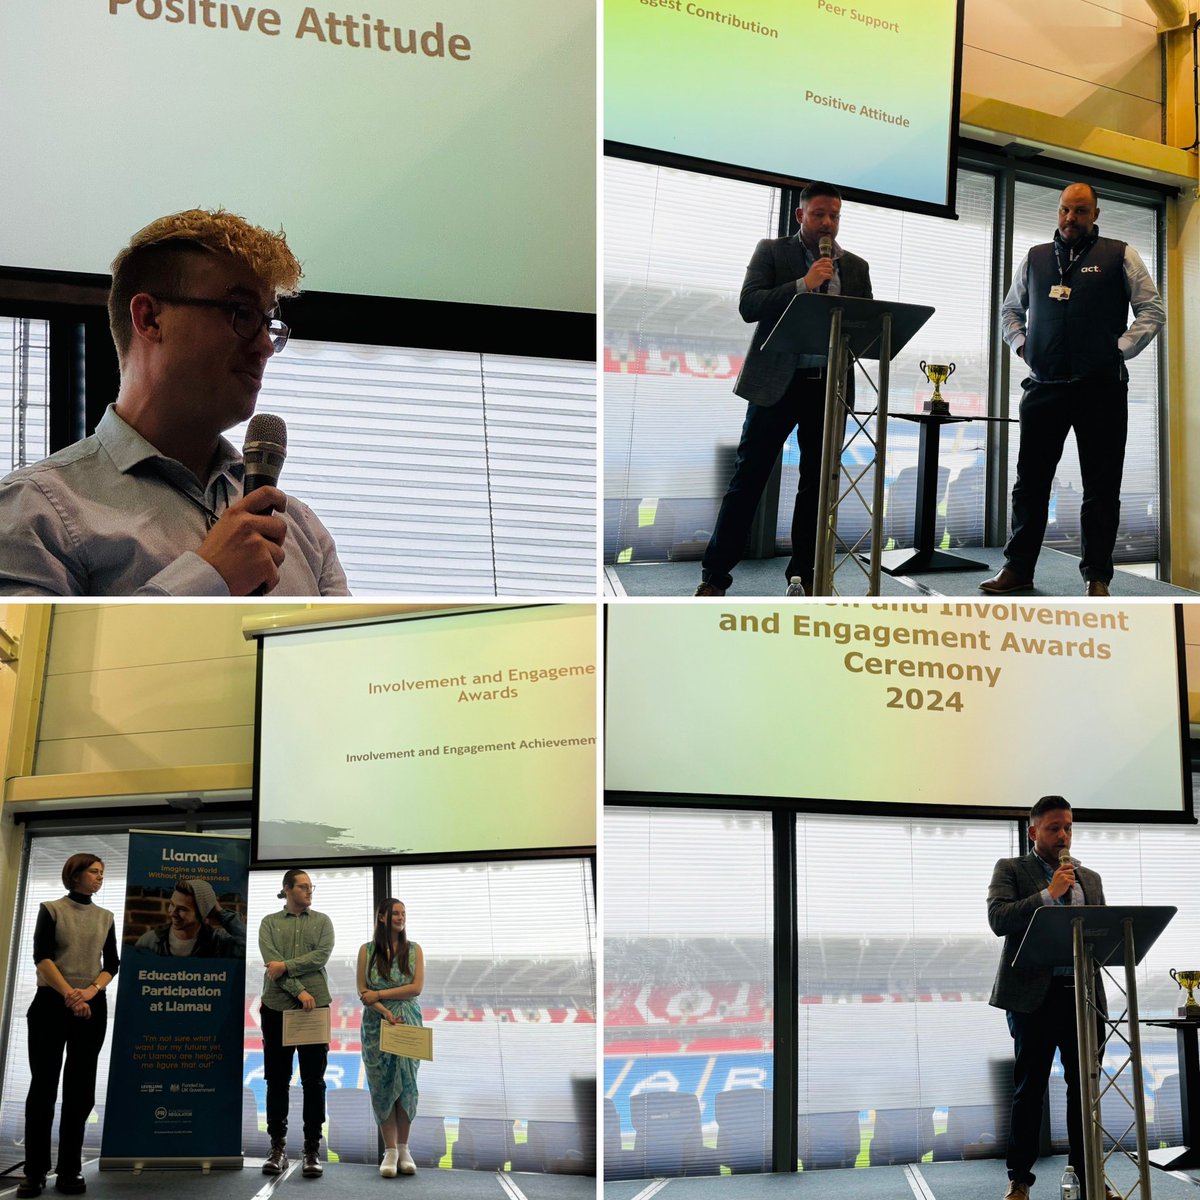 Few pics from @LlamauUK Achievement Awards today @CardiffCityStad A moving & passionate speech from our Ambassador for Learning, Mitchell Crees, who was supported by Llamau as a teenager. So proud of our award winners and my wonderful colleagues who help make the magic happen 🌟